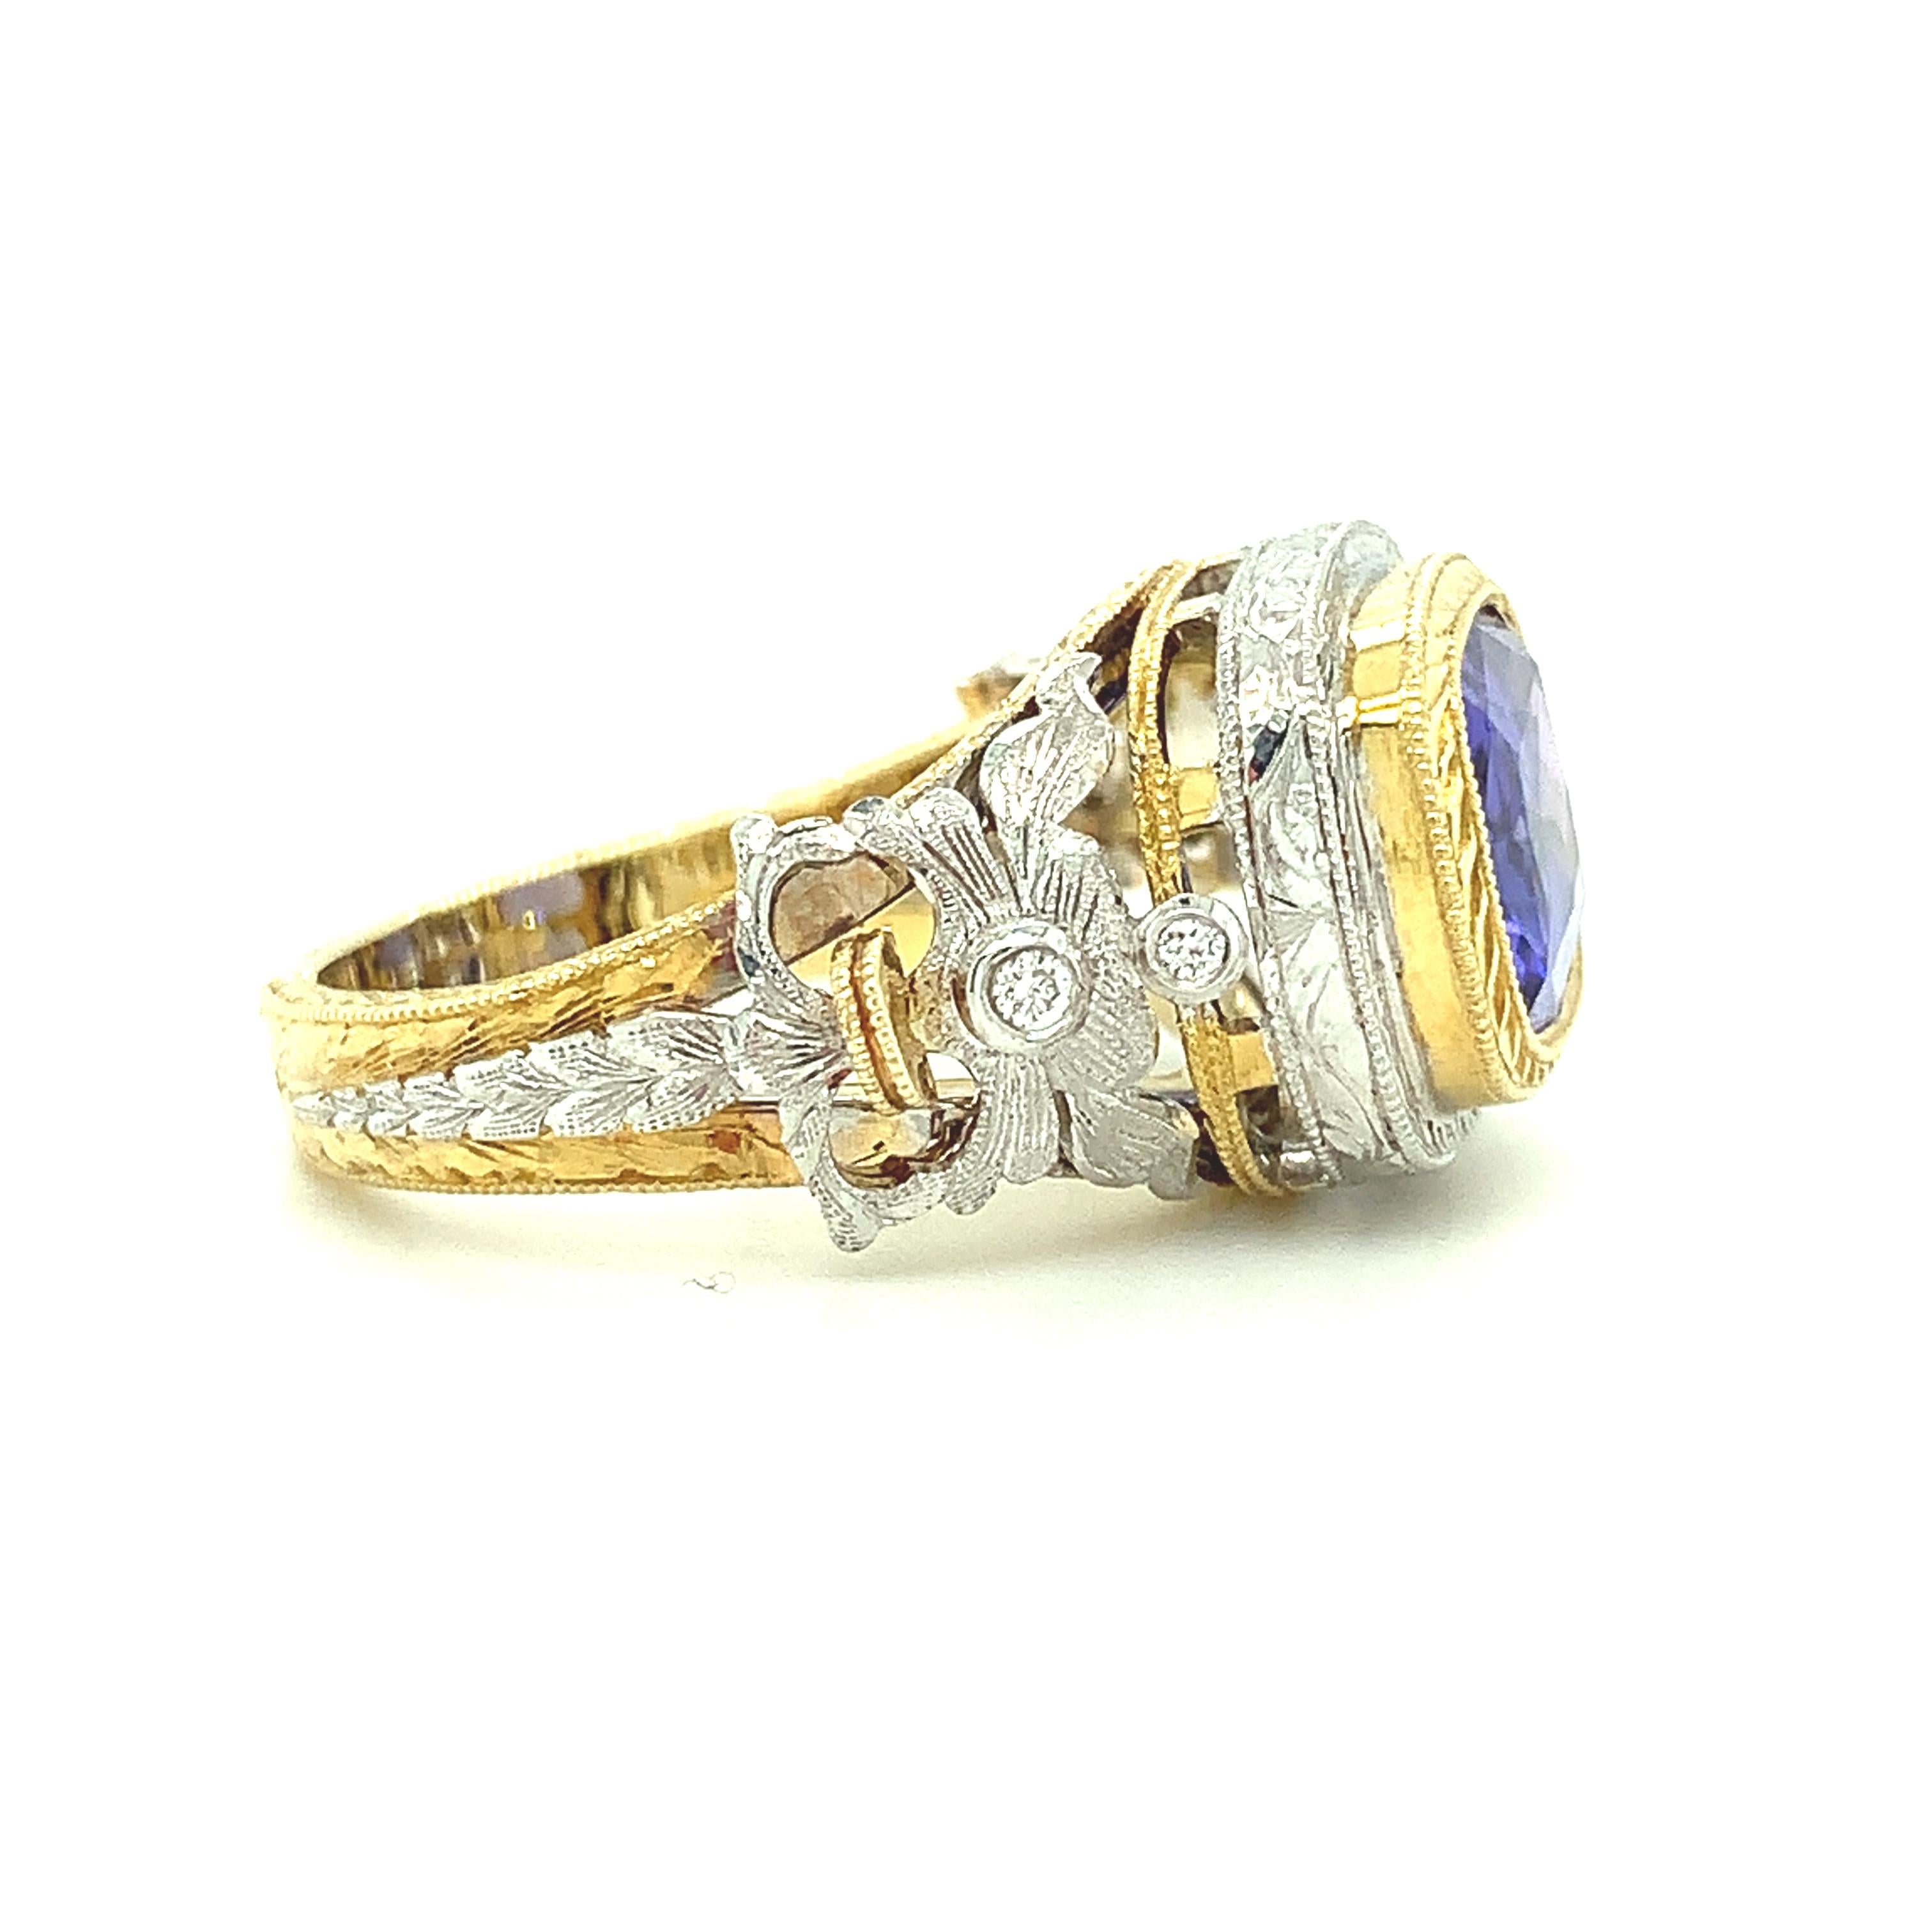 4.04 Carat Tanzanite and Diamond Cocktail Ring, Handmade in 18k Gold For Sale 1